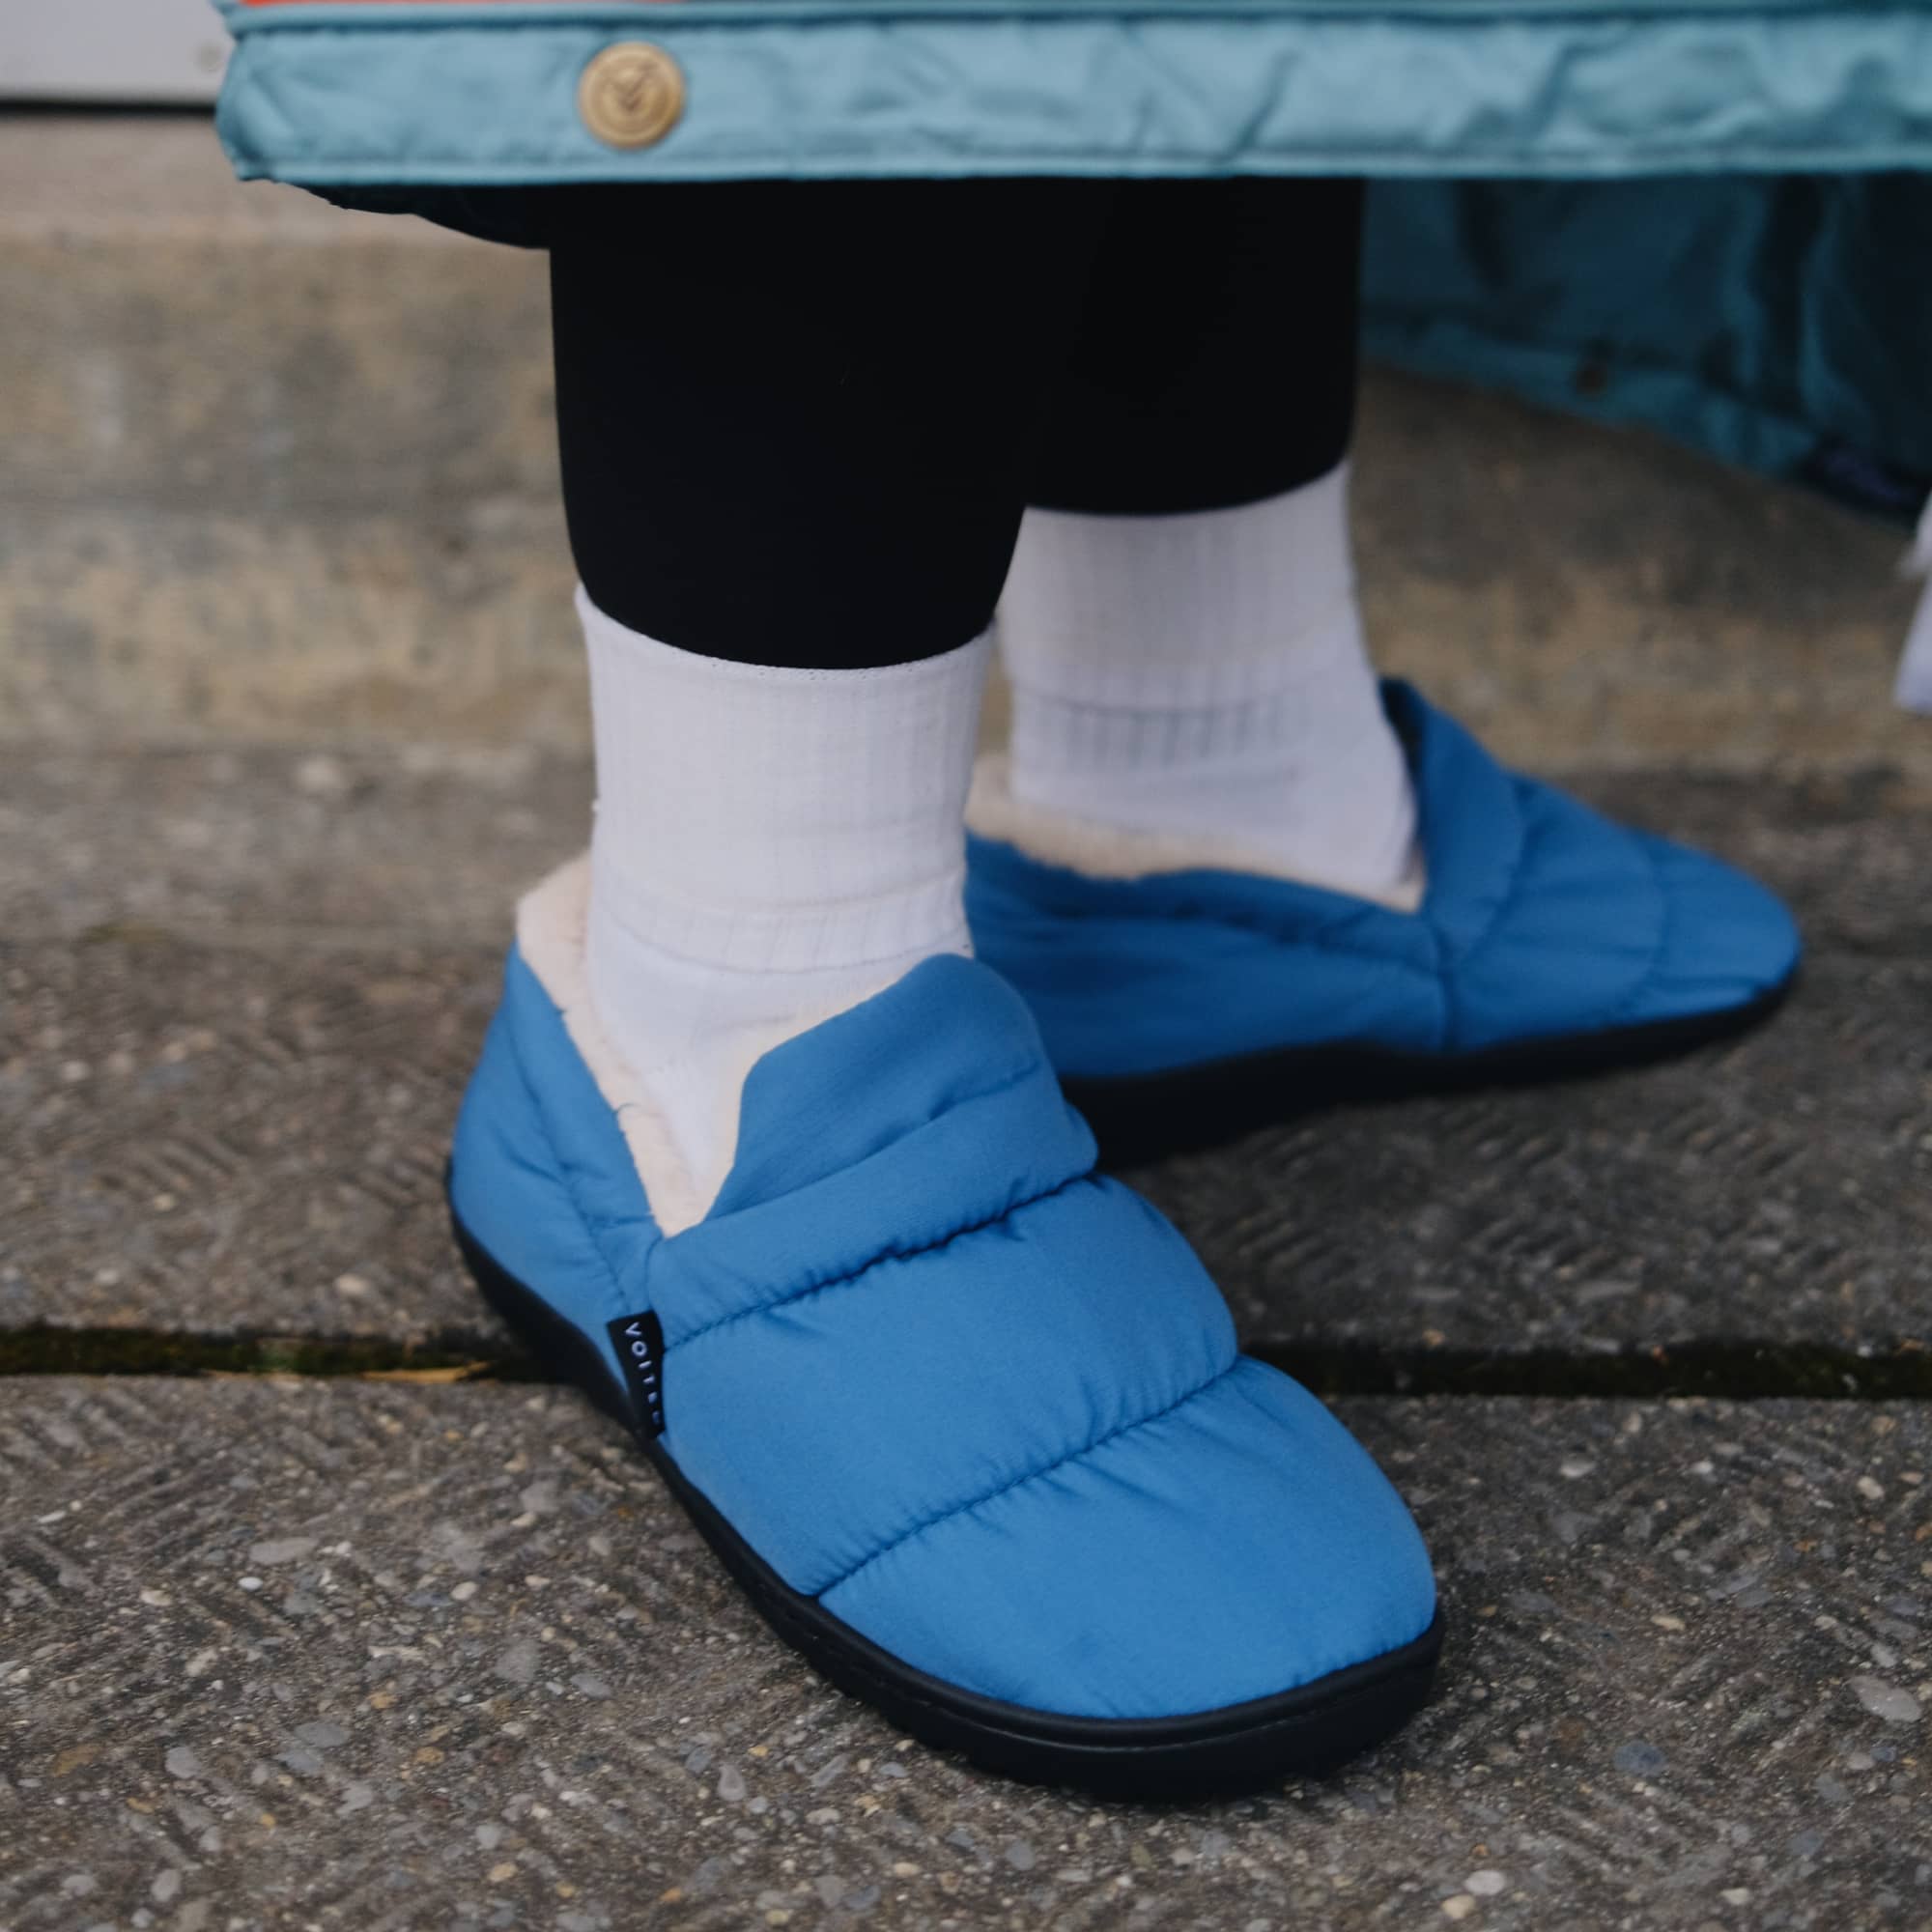 End your day in the comfort of the Rab Cirrus Hut Slipper | Camping Shop |  Outdoor Equipment Suppliers | BCH Camping – BCH Camping & Leisure